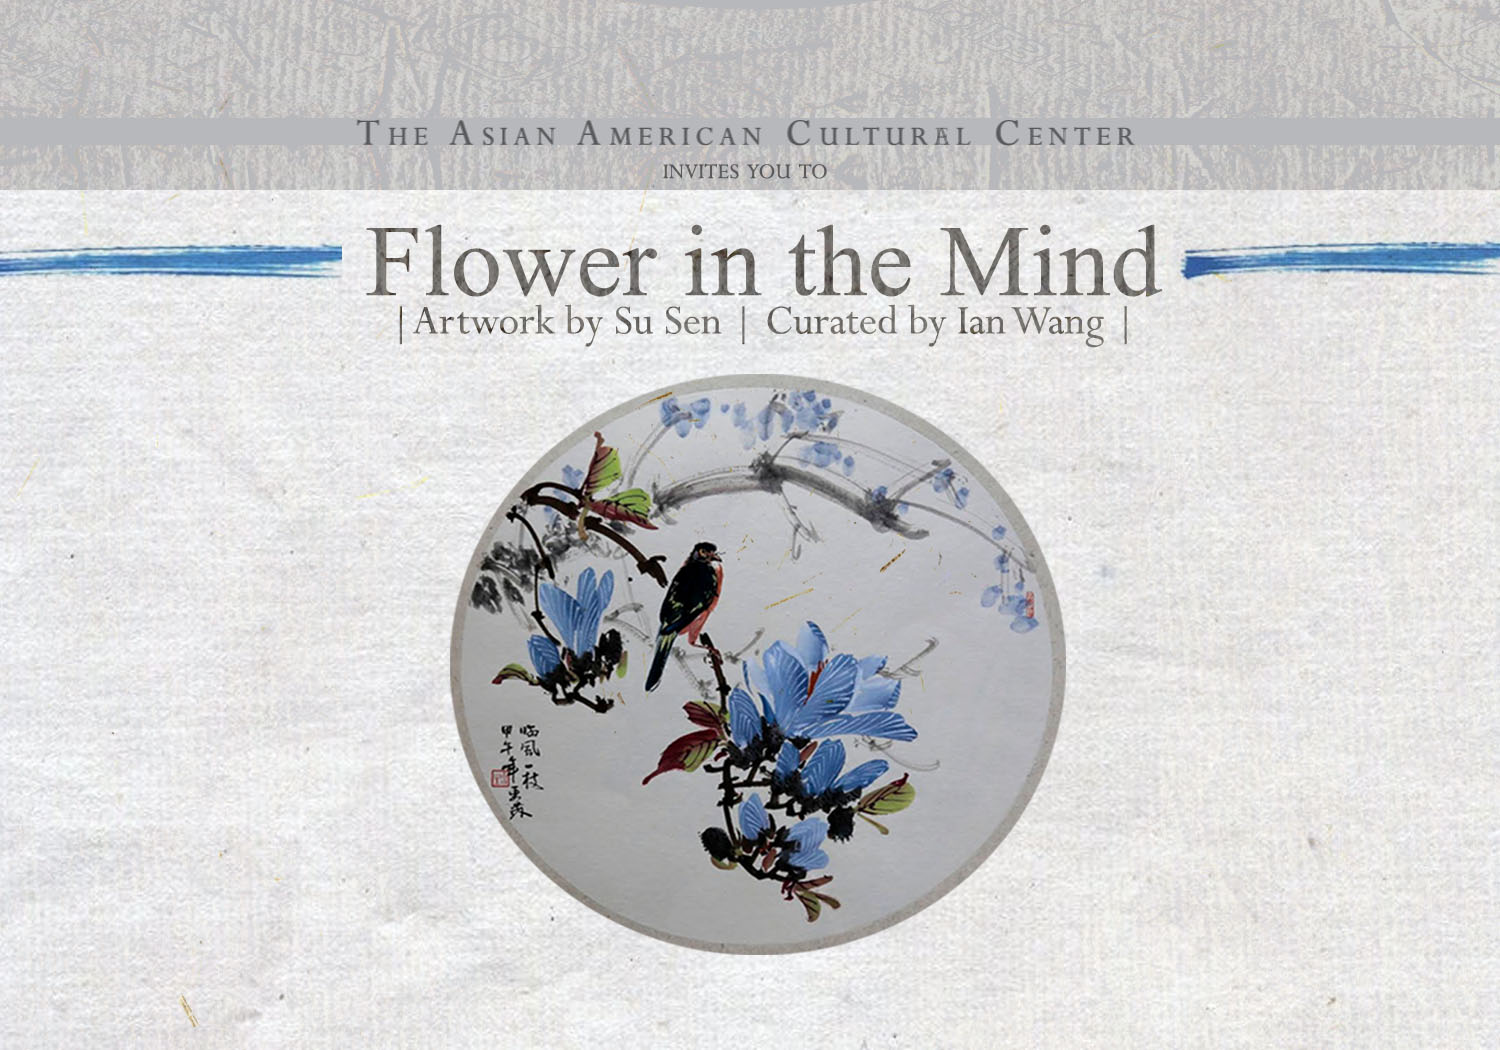 Flower in the Mind poster featuring a plate painted with bird and floral scene set against a paper texture background